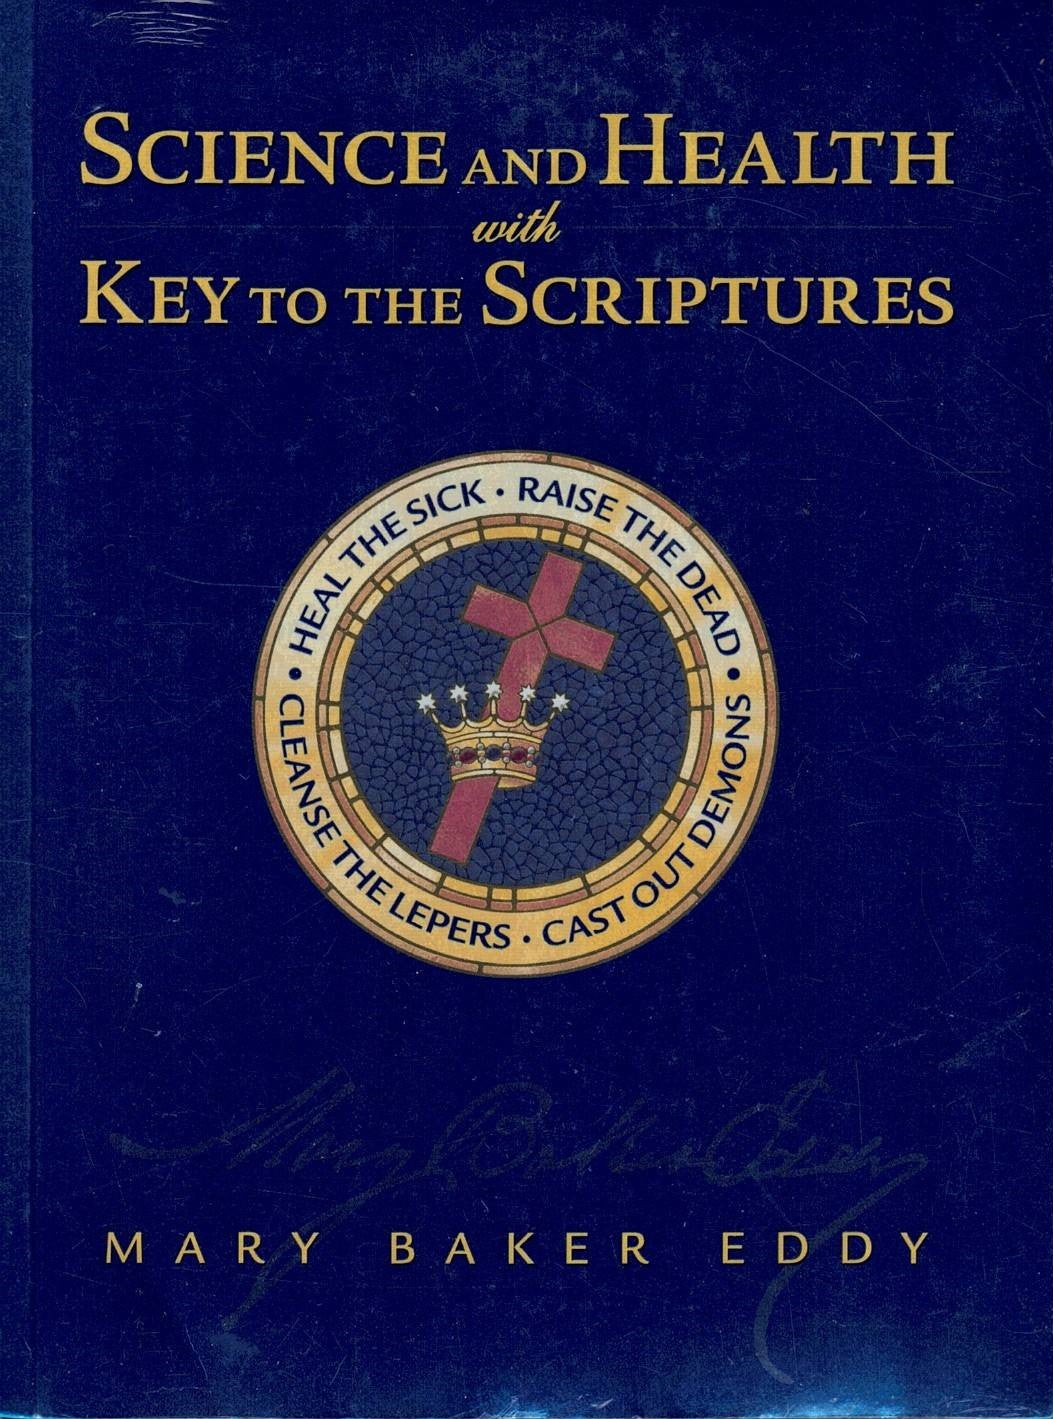 Science and Health with Key to the Scriptures - Study Edition (Metallic blue paperback)